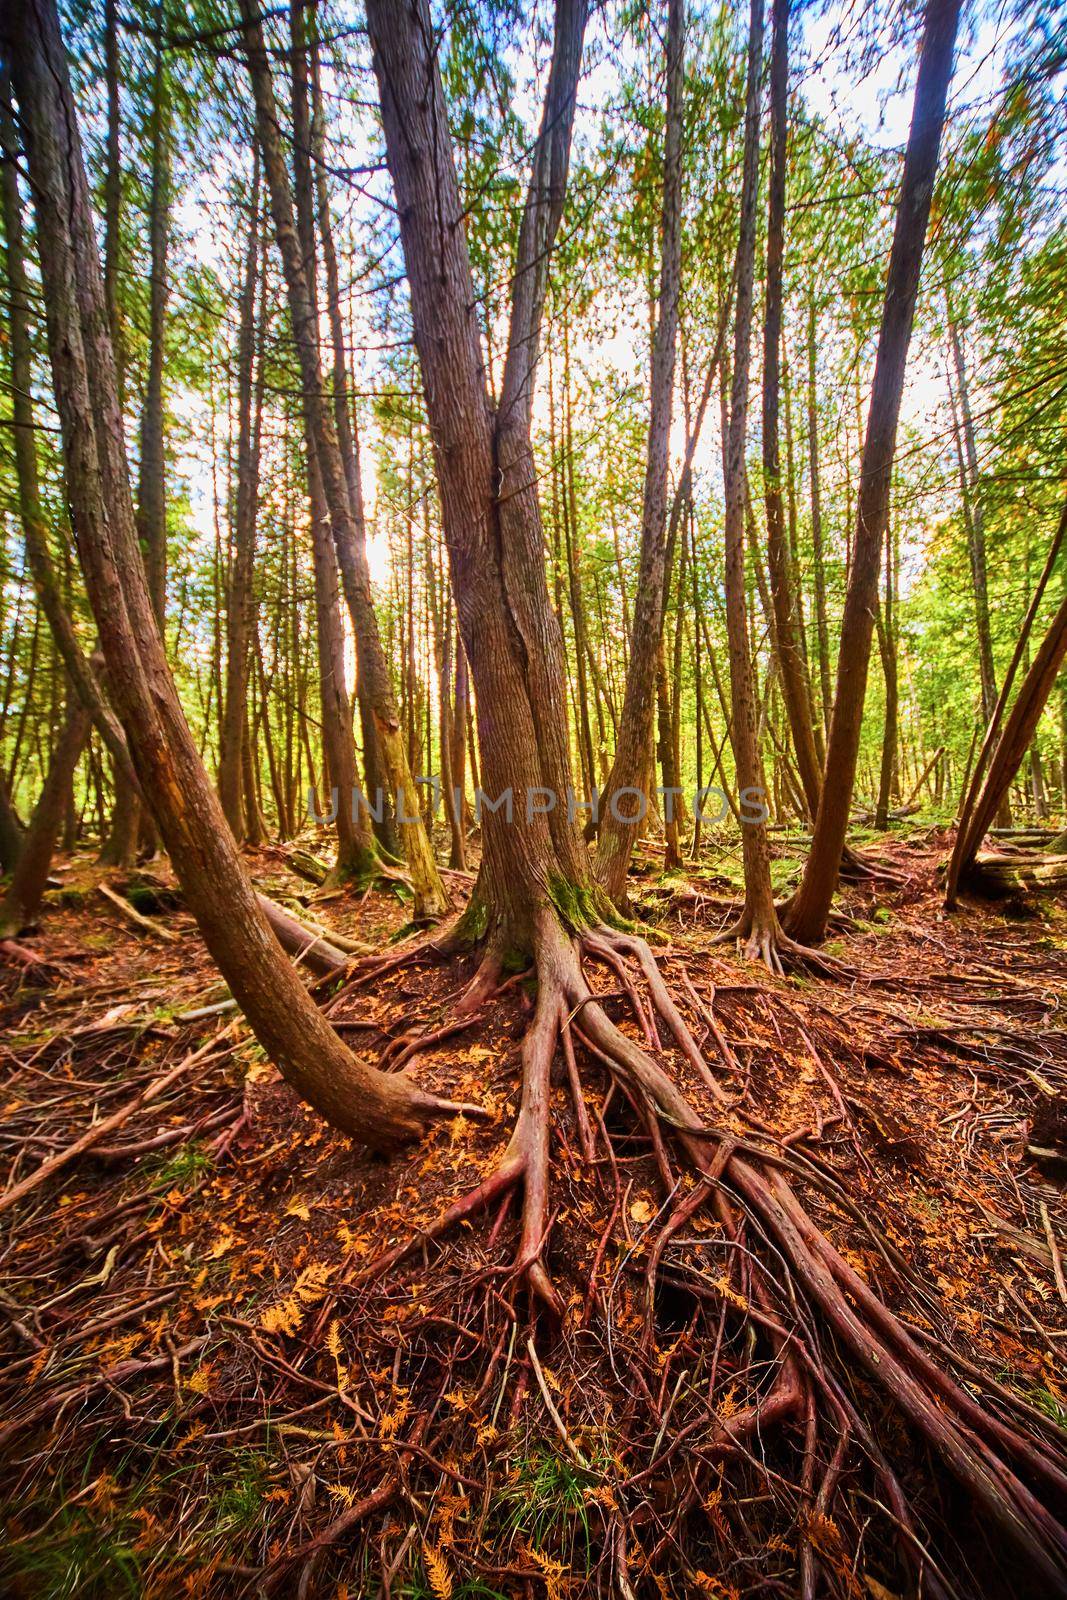 Image of Tall trees in woodland area with red roots exposed and a J shaped tree